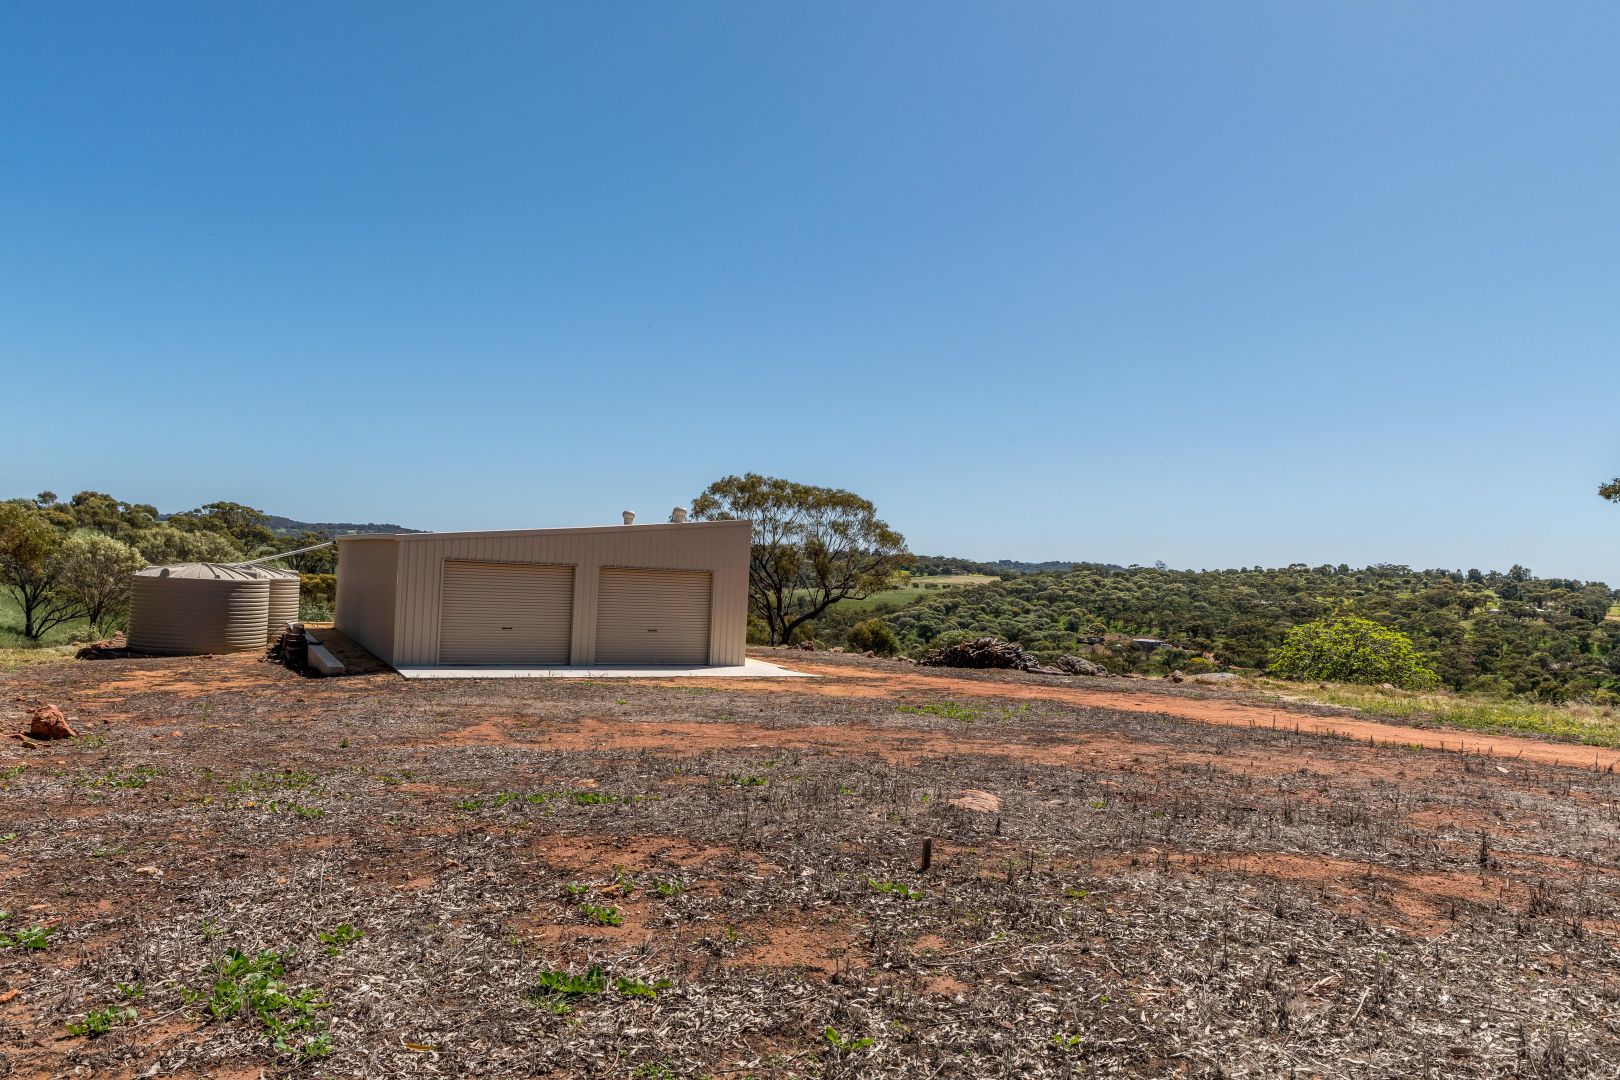 159 Coondle Dr, Coondle WA 6566, Image 1